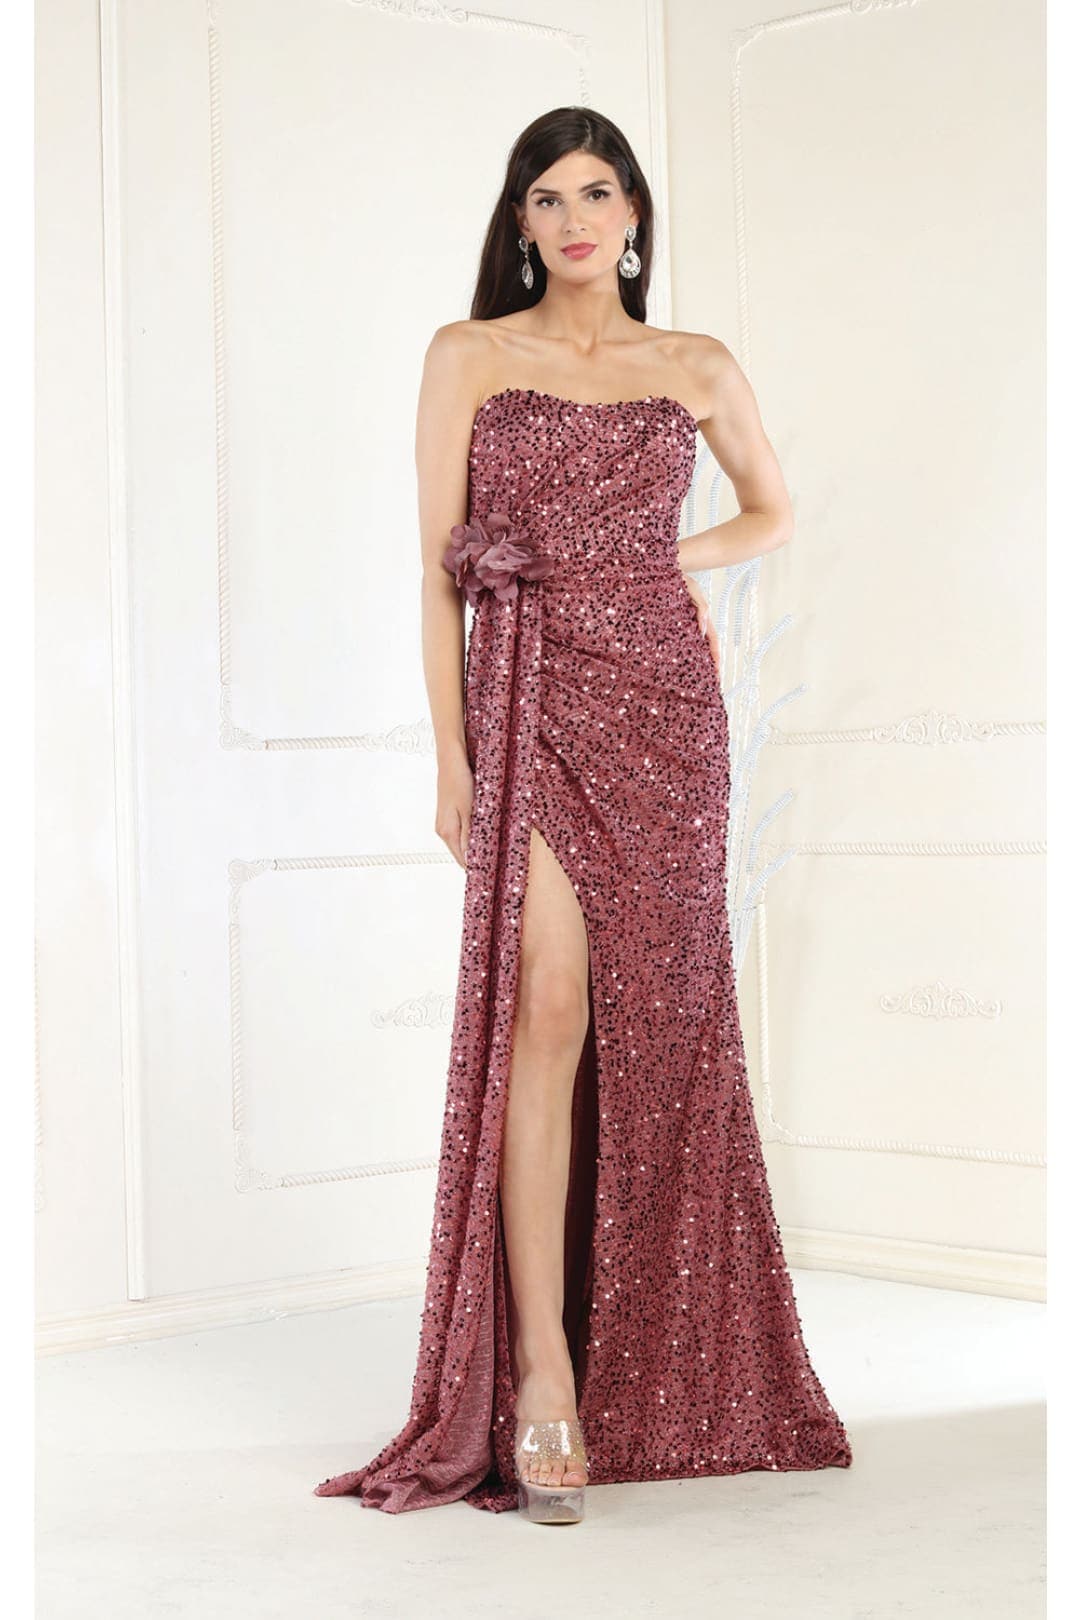 May Queen MQ1968 Strapless Sequined Formal Gown - MAUVE / 4 - Dress